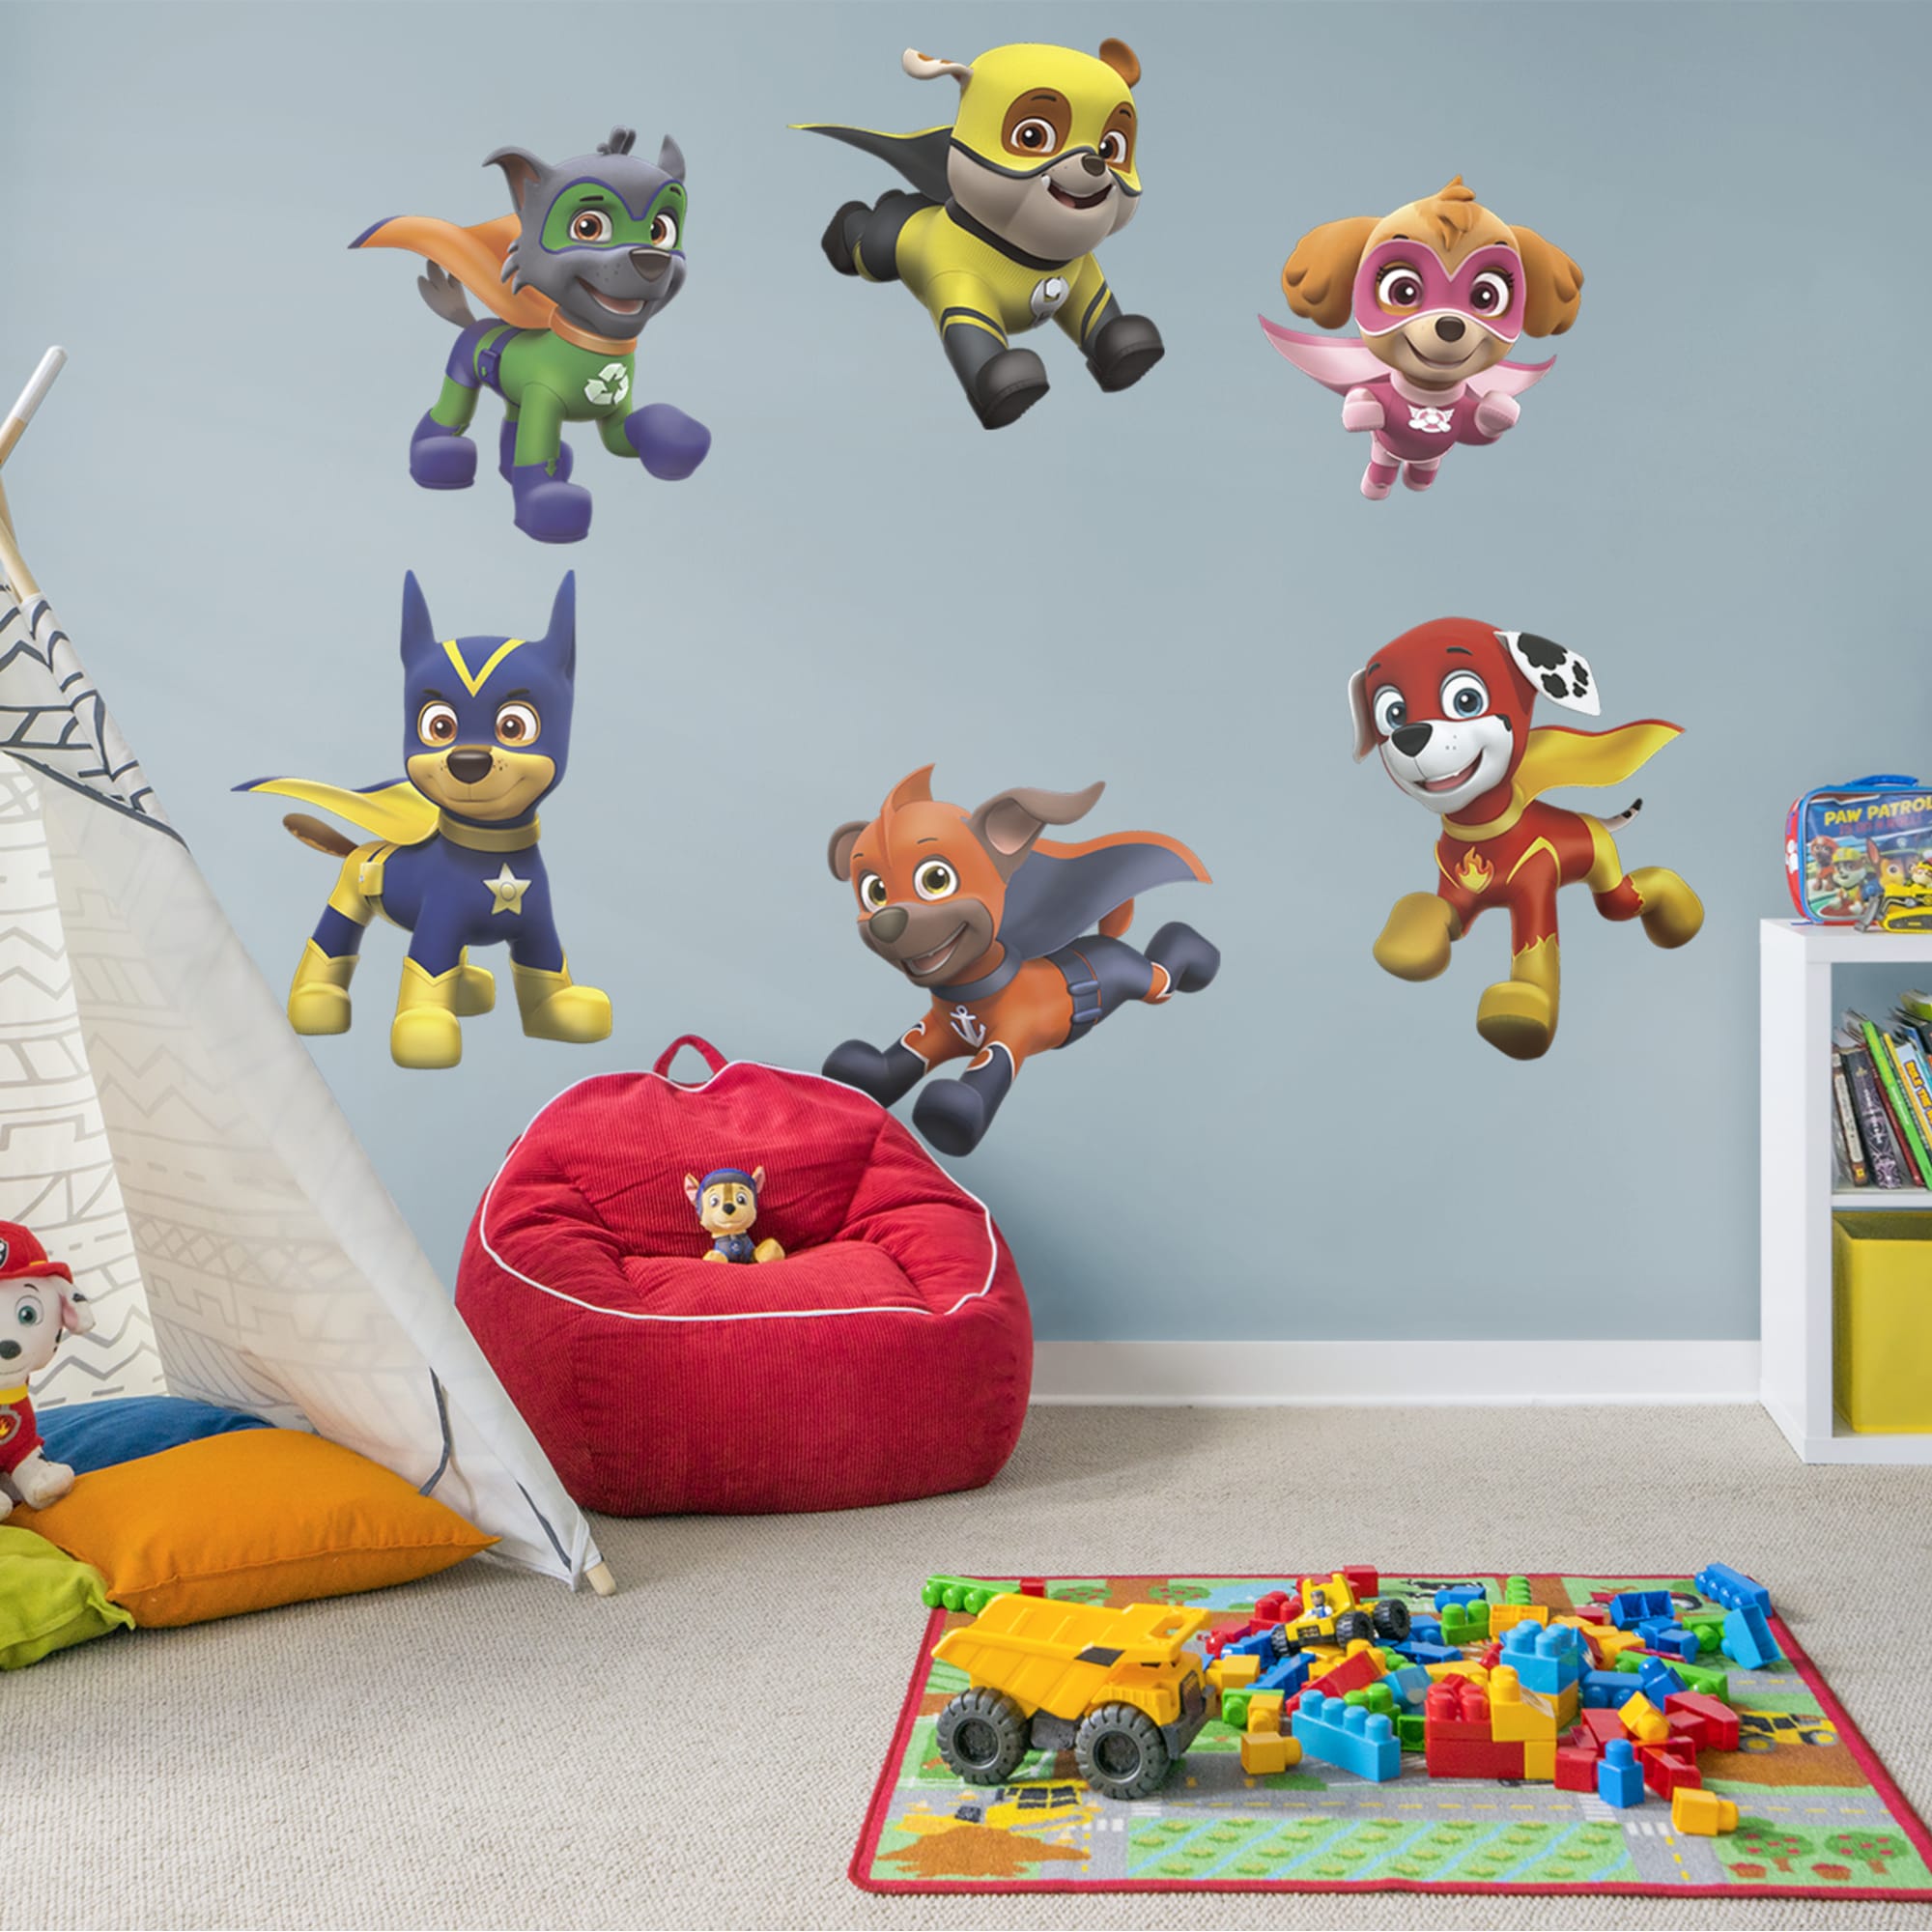 PAW Patrol: Super Pups Collection - Officially Licensed Removable Wall Decals 25.0"W x 25.0"H by Fathead | Vinyl